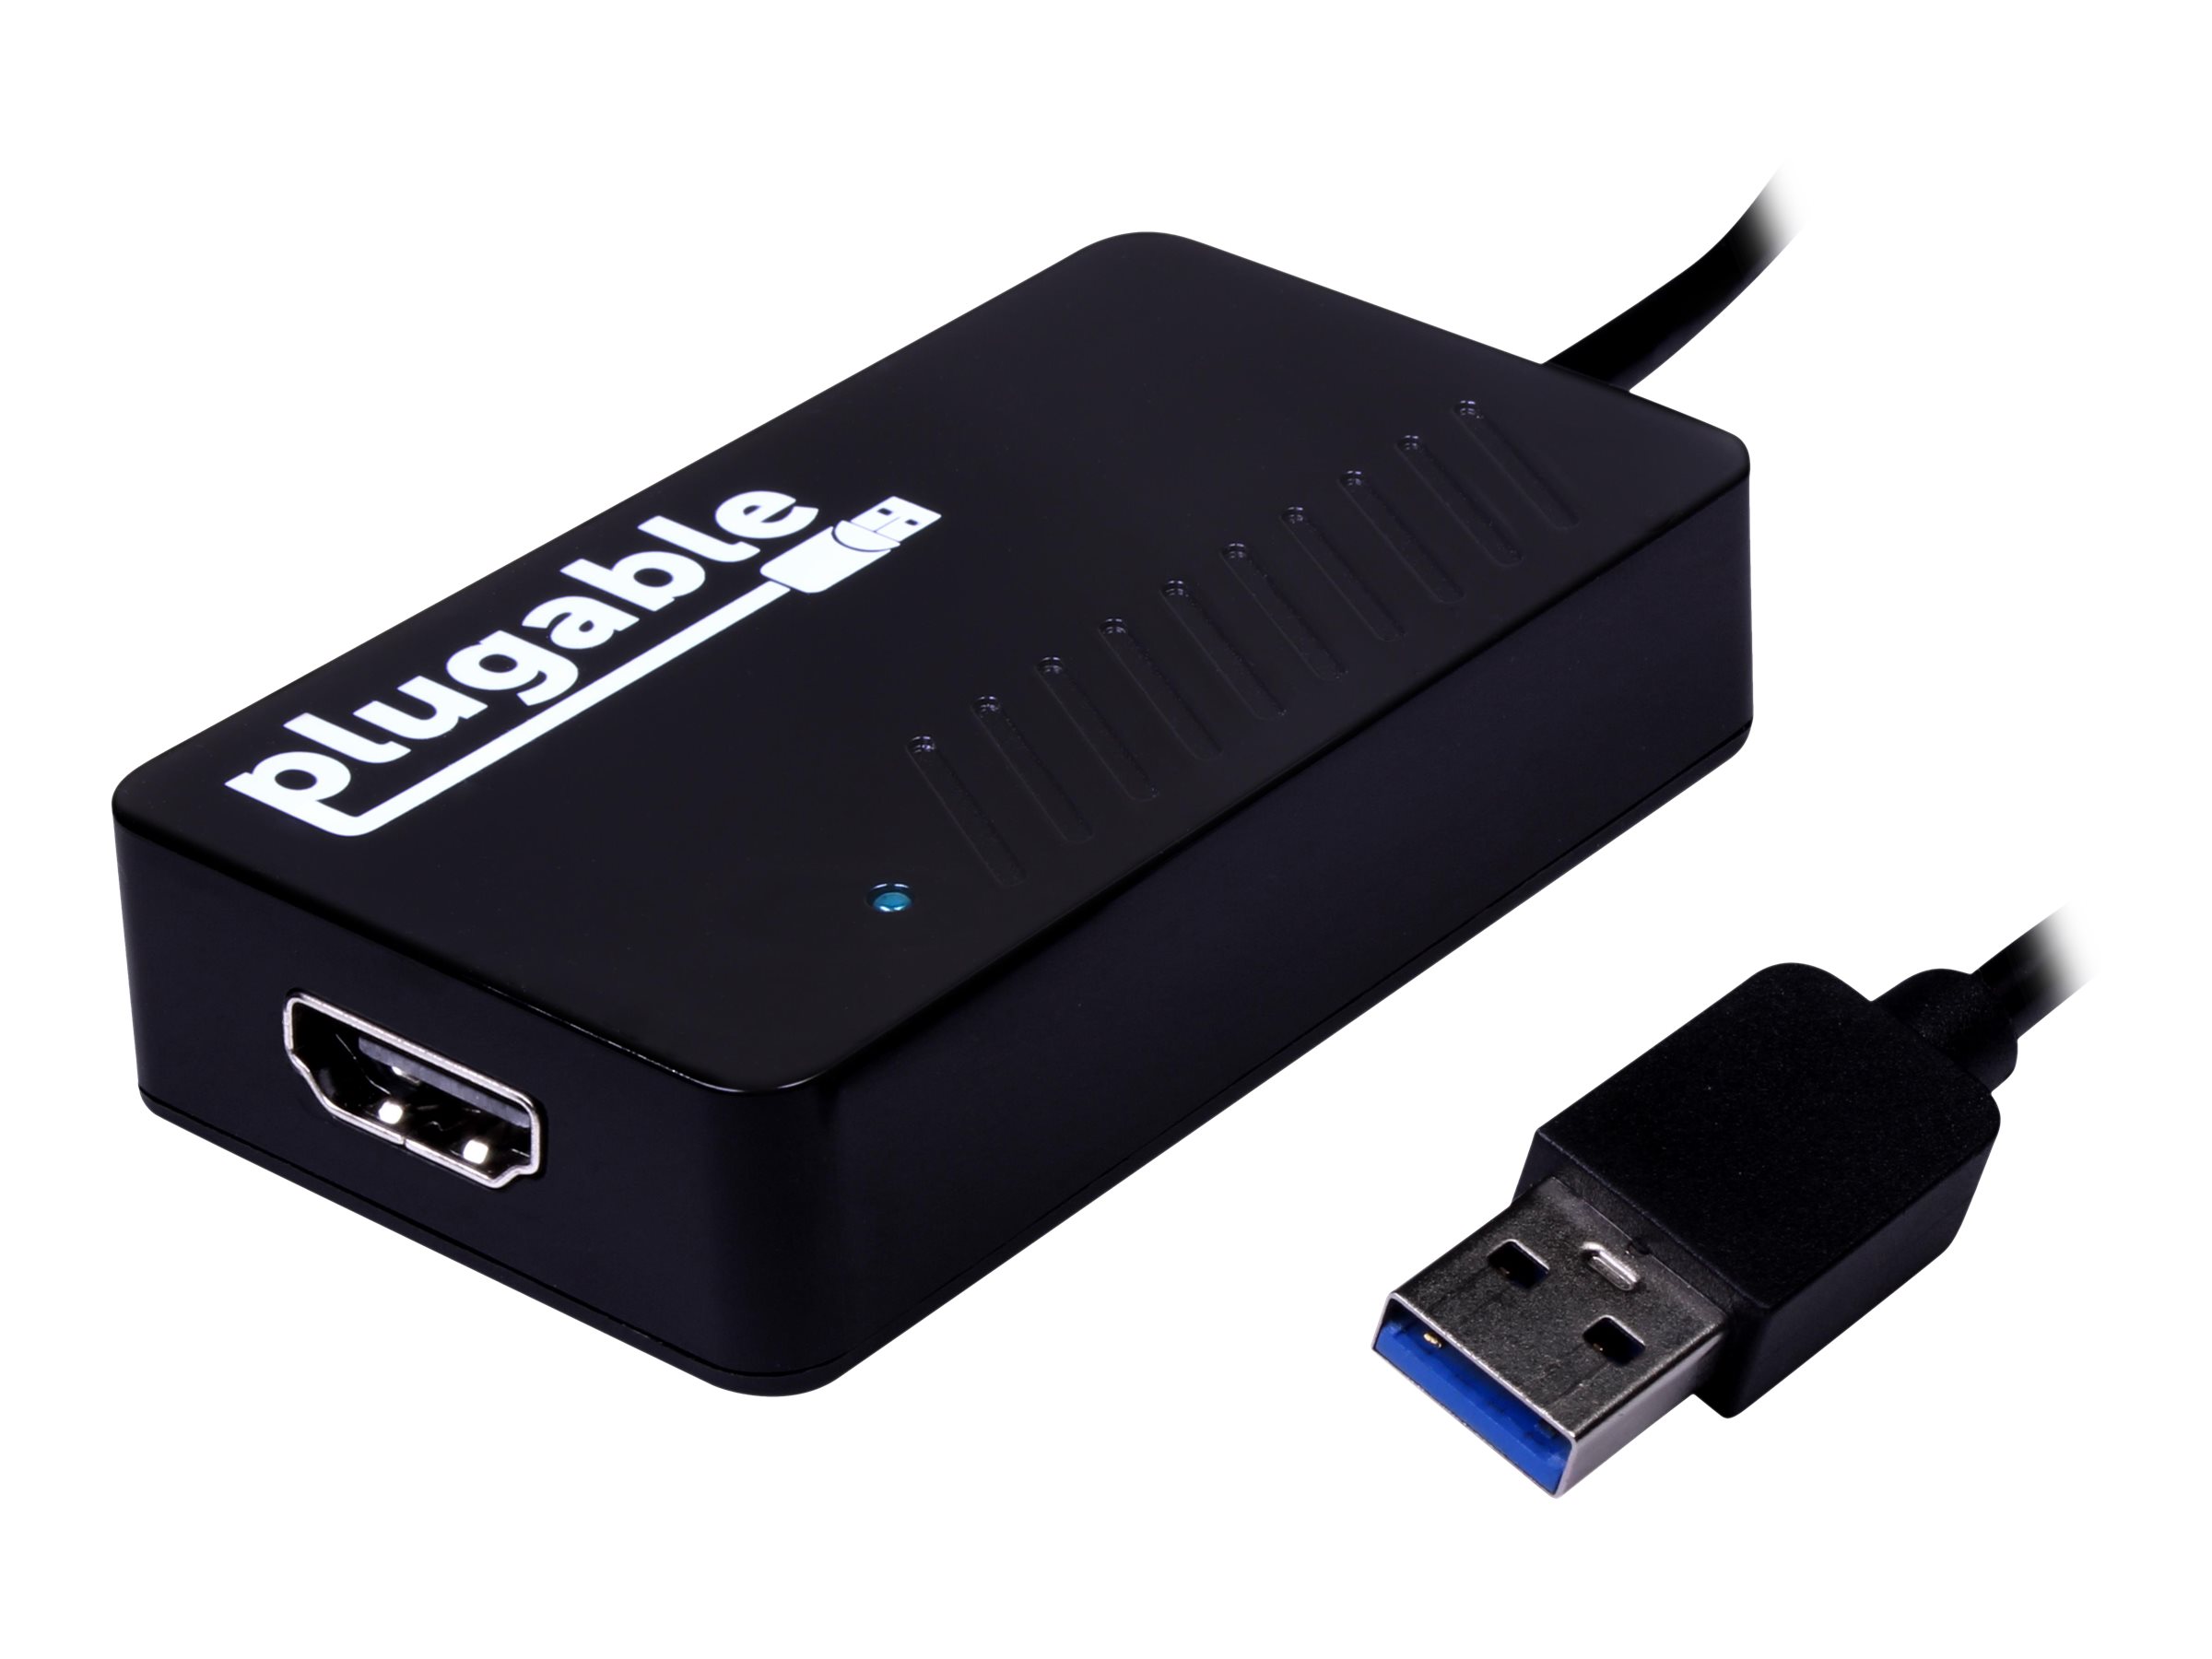 Plugable USB 3.0 to HDMI Video Graphics Adapter with Audio for Multiple Monitors up to 2560x1440 Supports Windows 11, 10, 8.1, 7, XP, and Mac - image 1 of 4